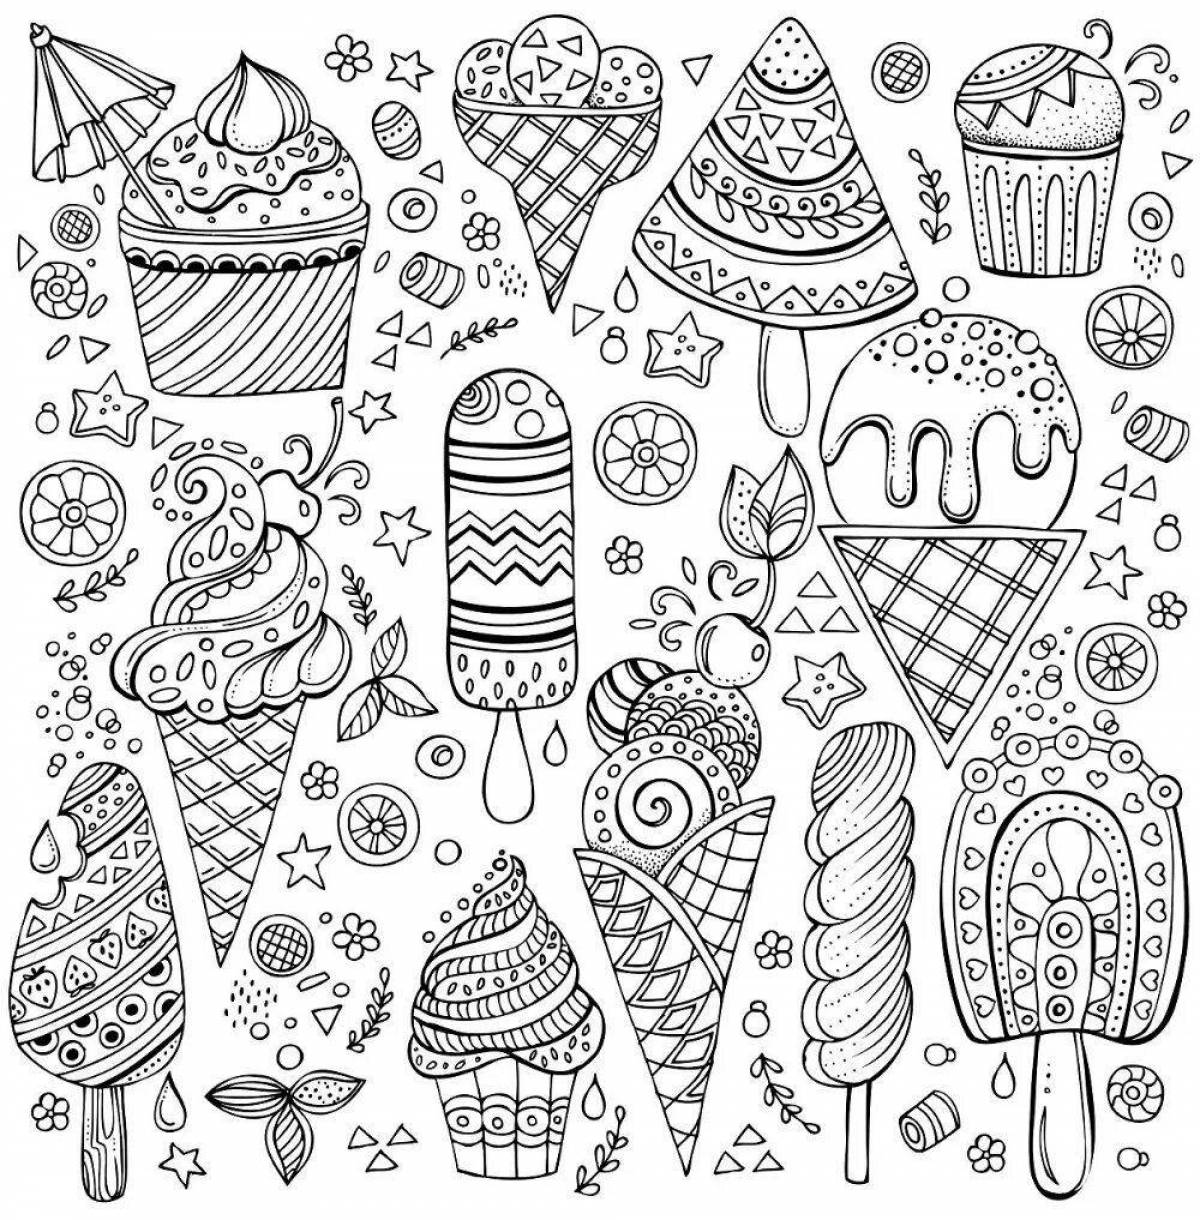 Radiant antistress food coloring page